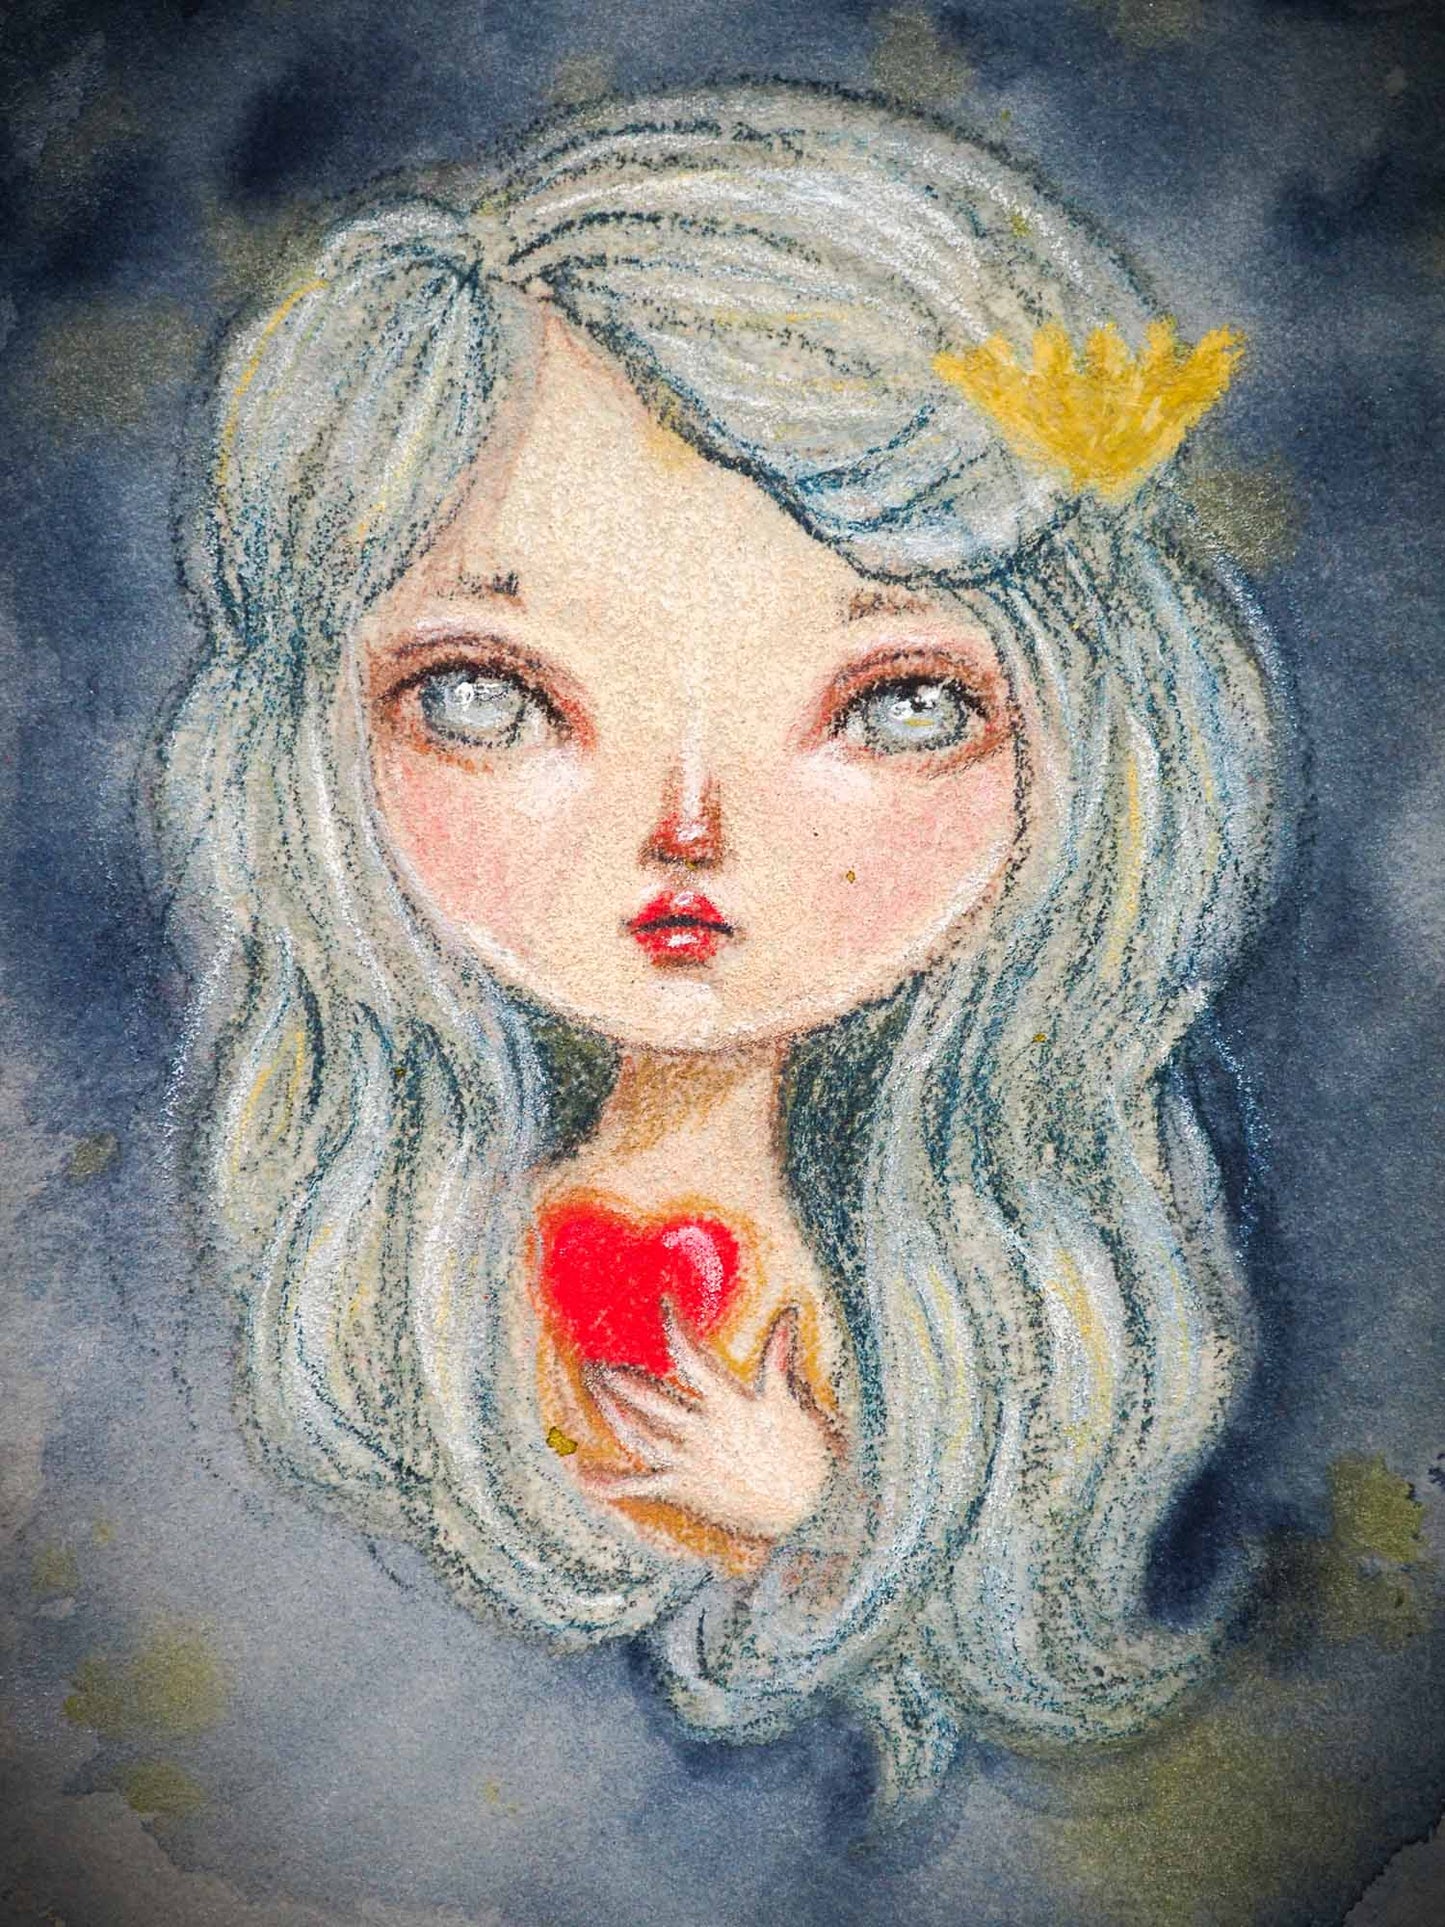 Original Mermaid color pencil and watercolor illustration on hand made paper by Danita Art. A beautiful drawing in colored pencil features fantasy art mermaid and siren with a red heart in her hands by Danita Art.